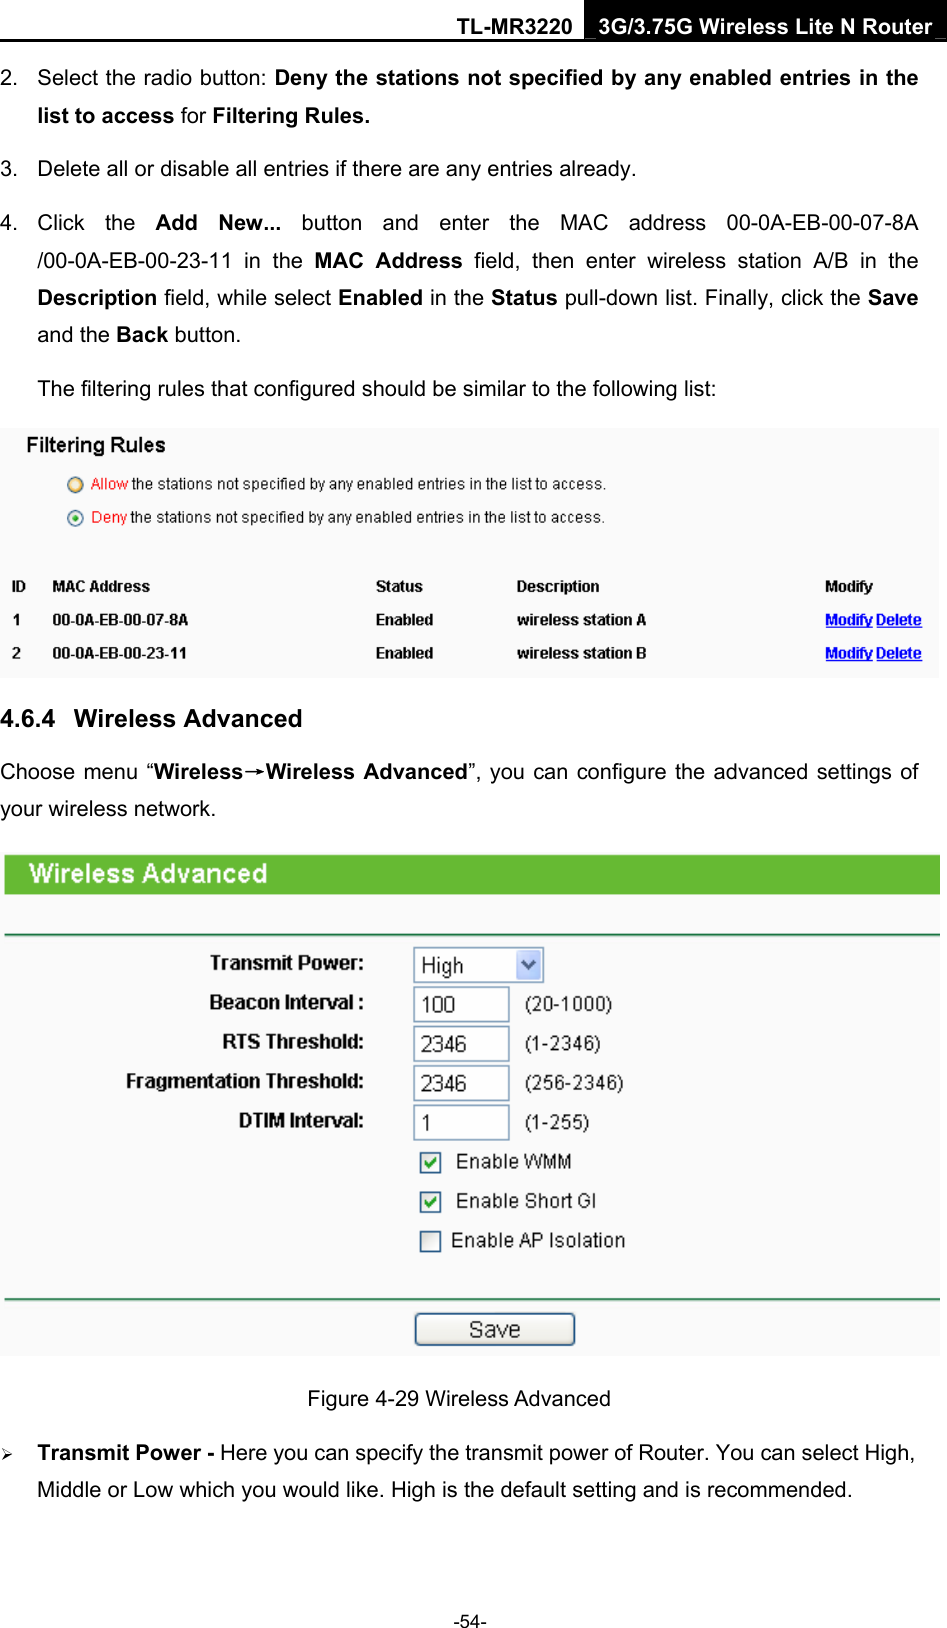 TL-MR3220 3G/3.75G Wireless Lite N Router -54- 2.  Select the radio button: Deny the stations not specified by any enabled entries in the list to access for Filtering Rules. 3.  Delete all or disable all entries if there are any entries already. 4. Click the Add New... button and enter the MAC address 00-0A-EB-00-07-8A /00-0A-EB-00-23-11 in the MAC Address field, then enter wireless station A/B in the Description field, while select Enabled in the Status pull-down list. Finally, click the Save and the Back button. The filtering rules that configured should be similar to the following list:    4.6.4  Wireless Advanced Choose menu “Wireless→Wireless Advanced”, you can configure the advanced settings of your wireless network.  Figure 4-29 Wireless Advanced ¾ Transmit Power - Here you can specify the transmit power of Router. You can select High, Middle or Low which you would like. High is the default setting and is recommended. 